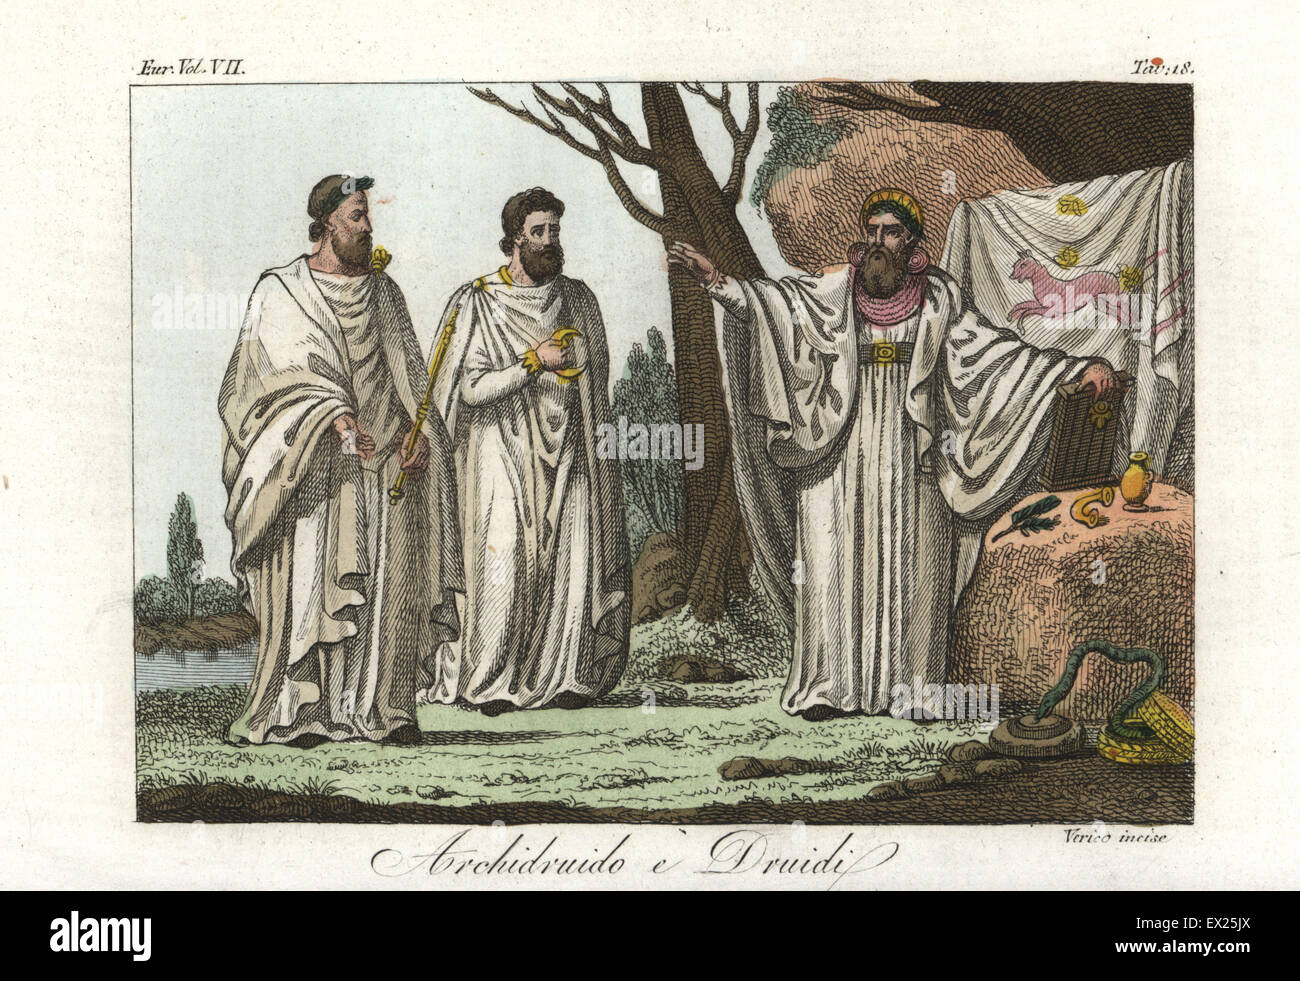 Druids and priest in sacred robes with religious paraphernalia, gold vessels, serpent, and painted curtain. Handcoloured copperplate engraving by Verico from Giulio Ferrario's Costumes Ancient and Modern of the Peoples of the World, Florence, 1847. Stock Photo